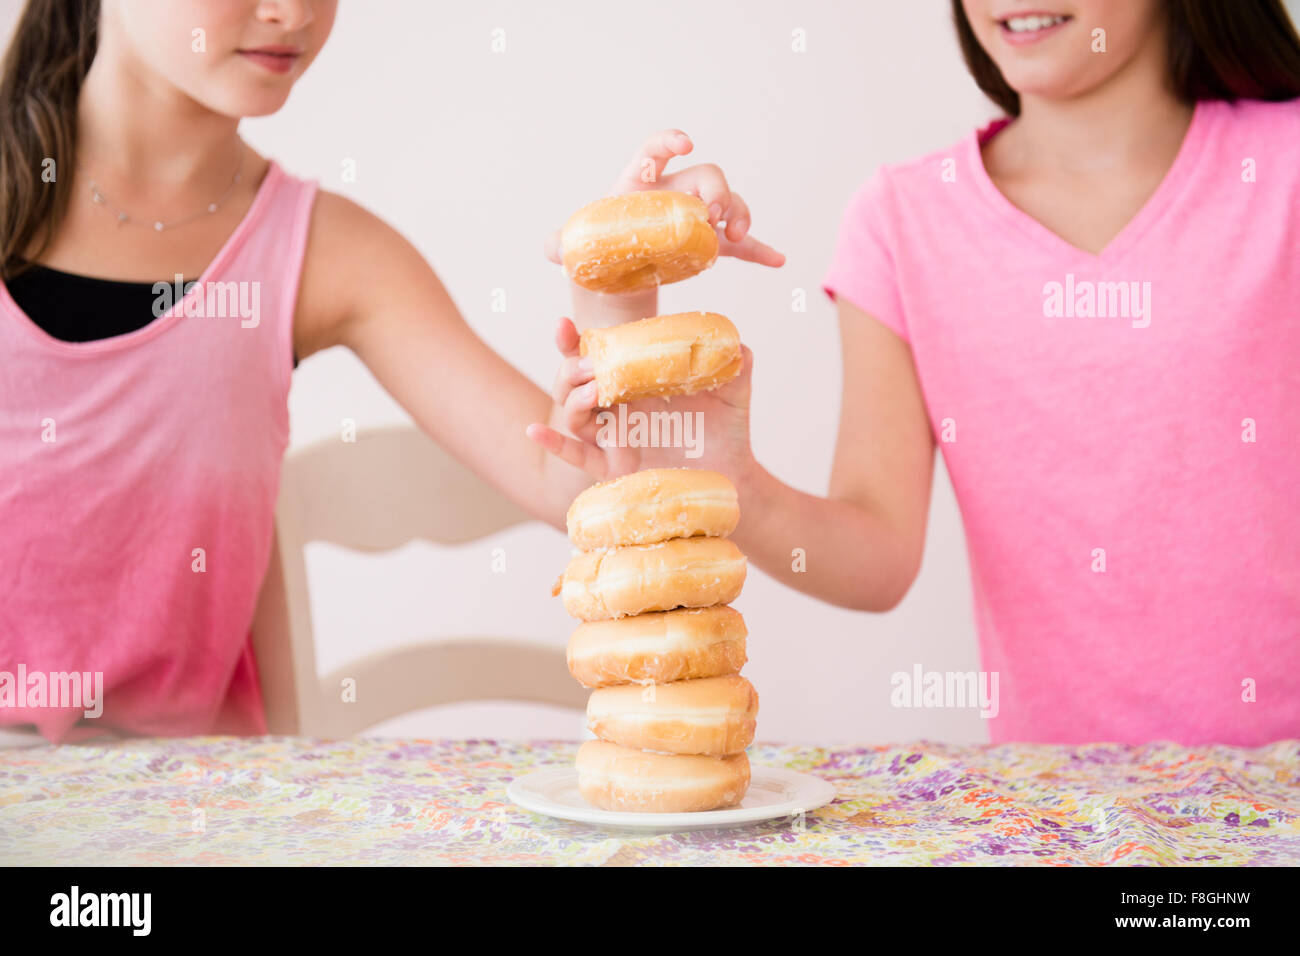 Caucasian twin sisters eating donuts Stock Photo